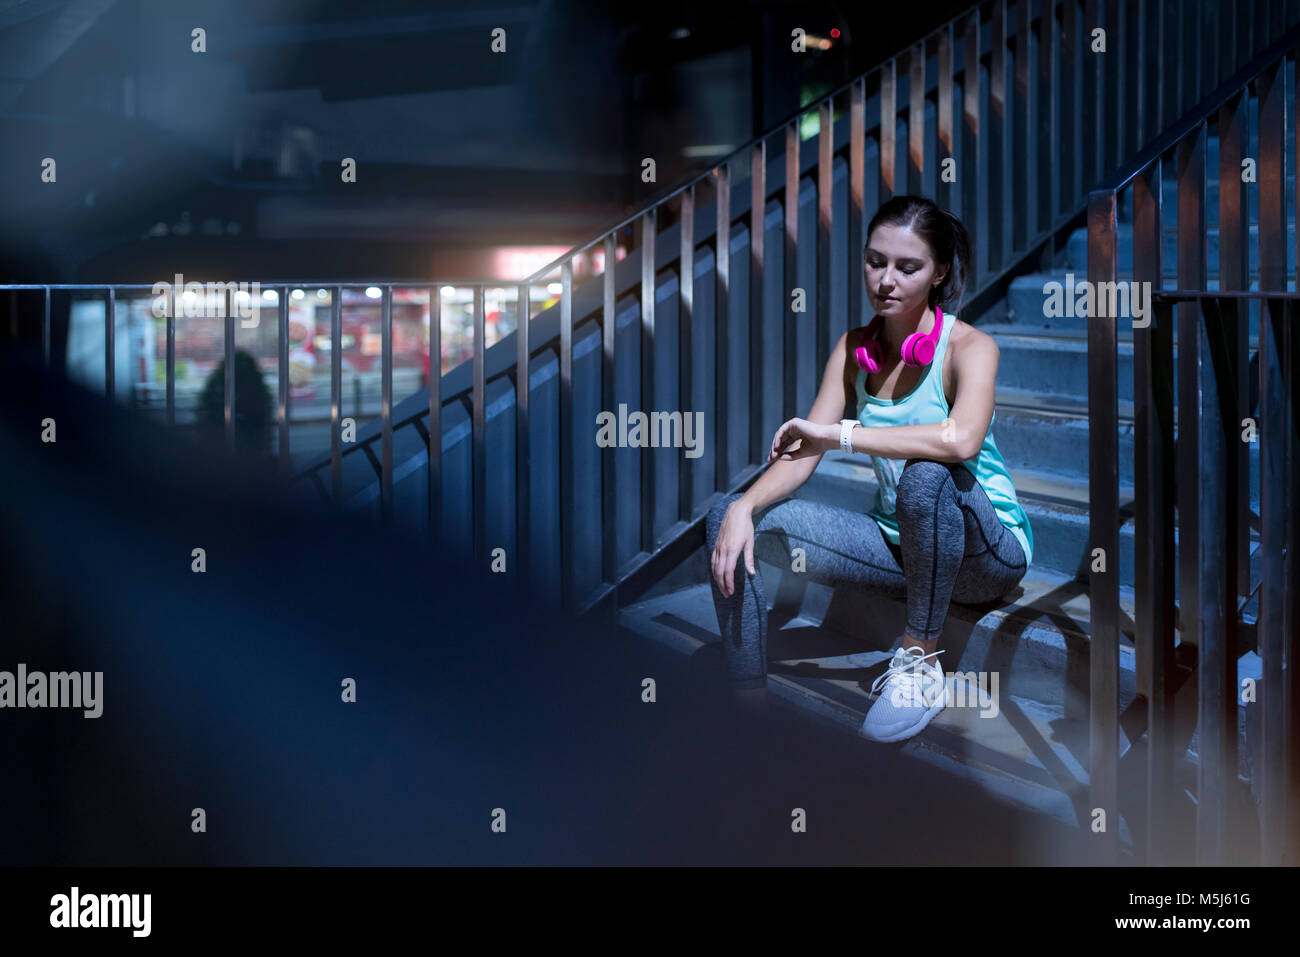 Young woman with pink headphones sitting on stairs and checking her smartwatch Stock Photo